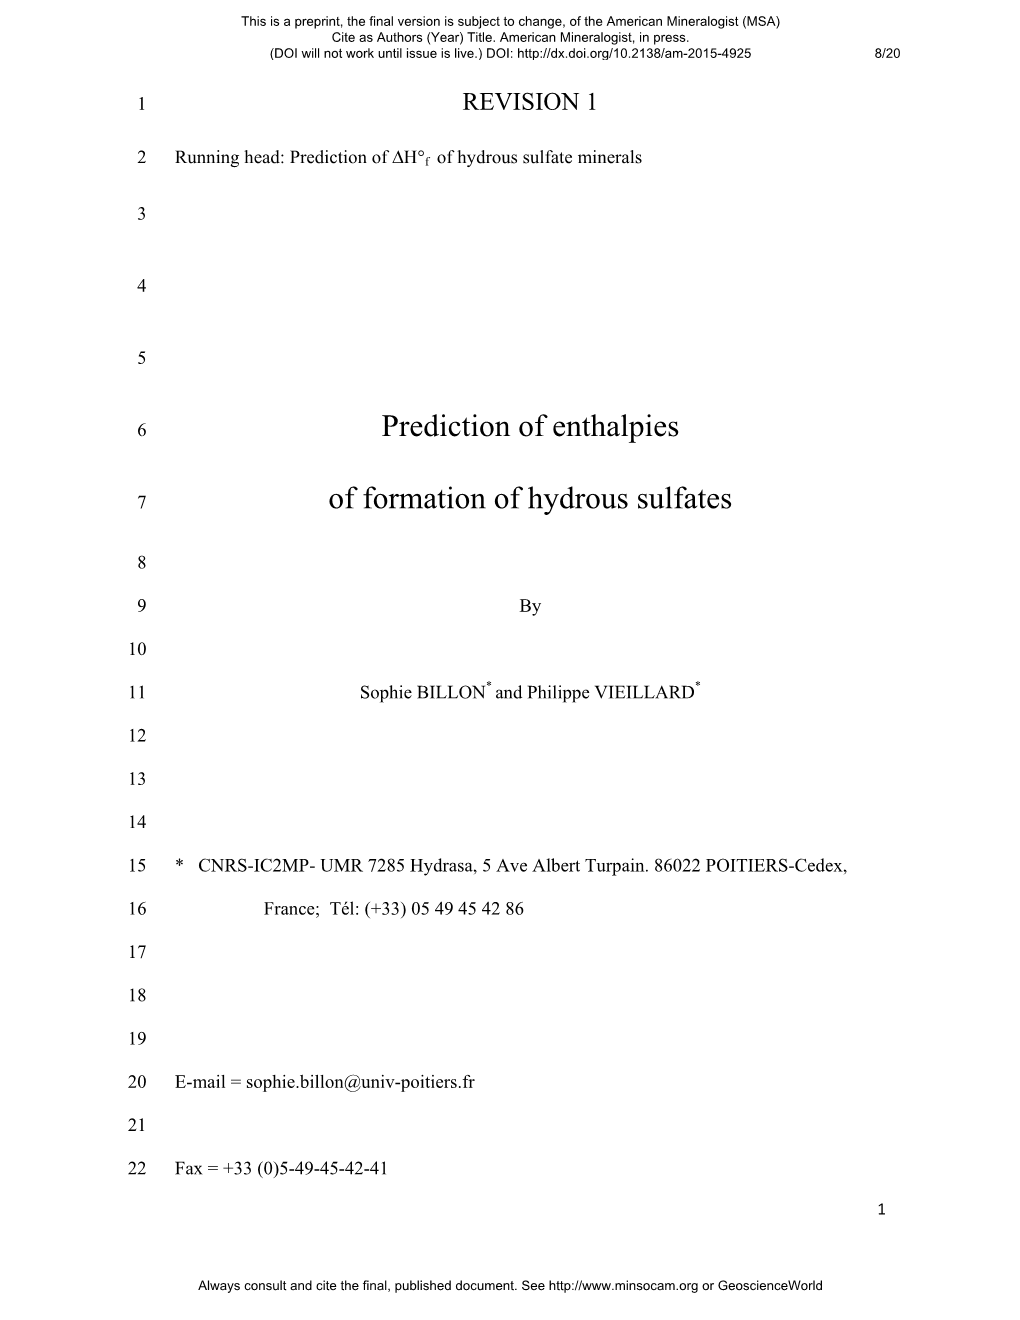 Prediction of Enthalpies of Formation of Hydrous Sulfates